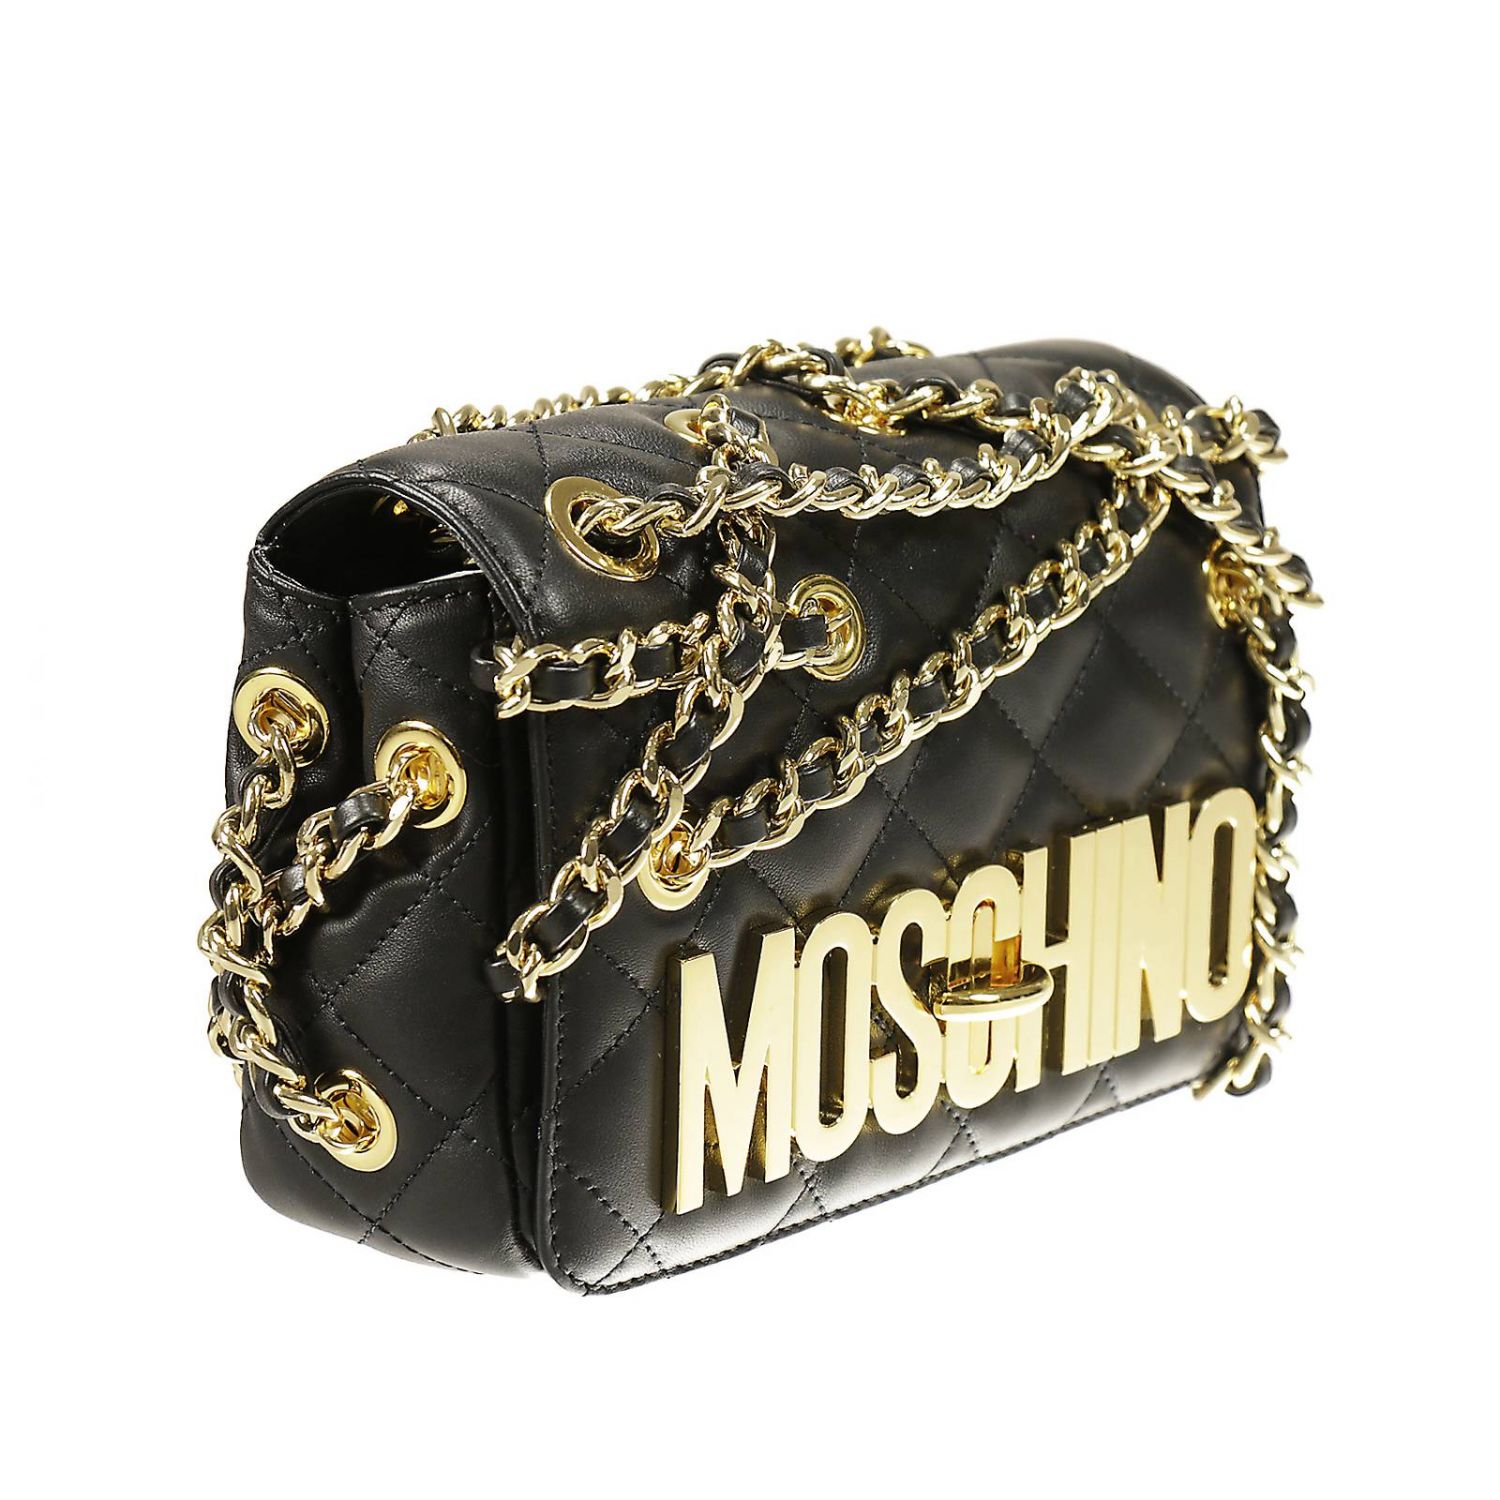 Moschino Couture Outlet: | Shoulder Bag Moschino Couture Women Black ...